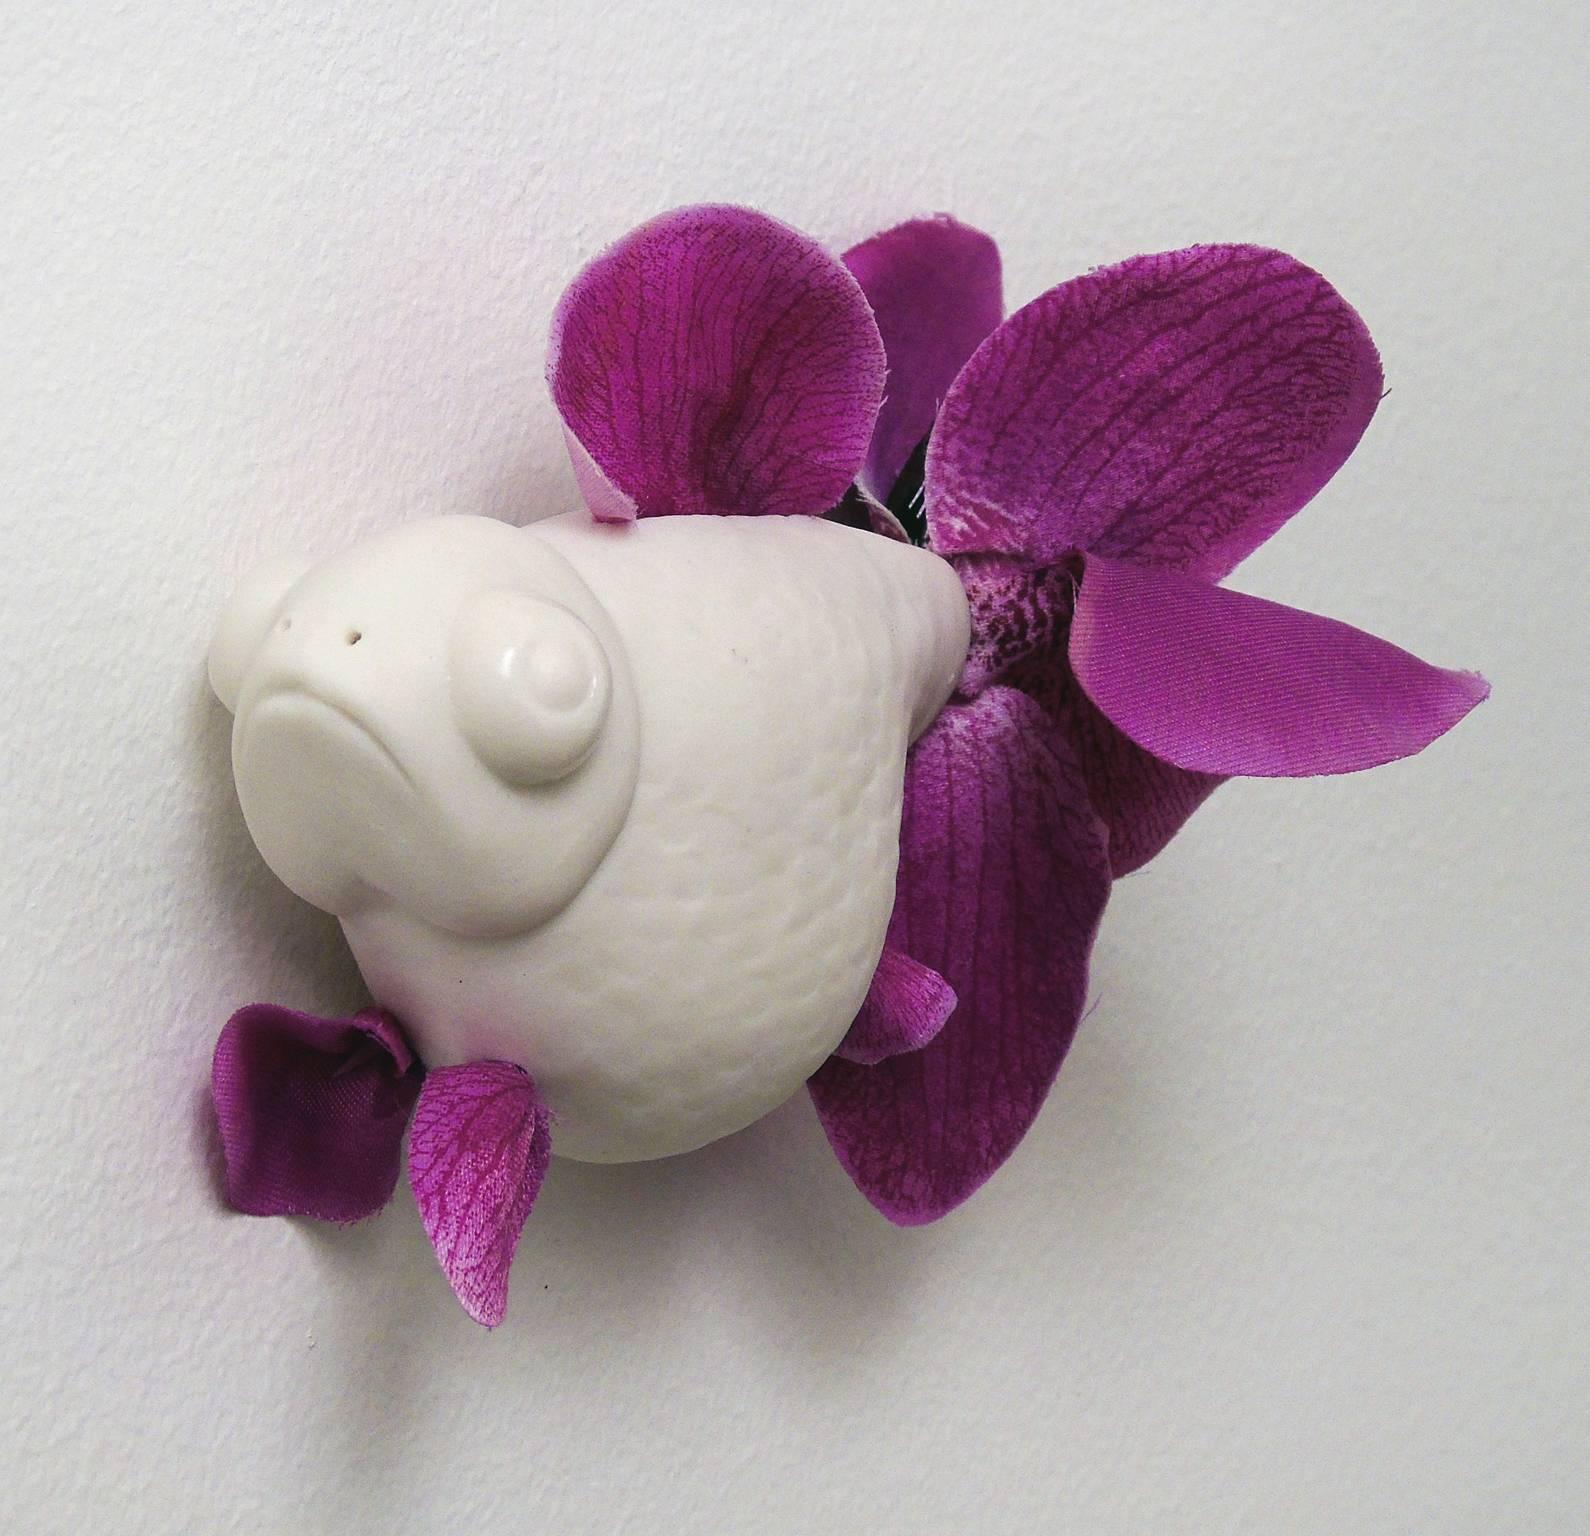 Prize VIII (white porcelain fish) - Contemporary Sculpture by Bethany Krull